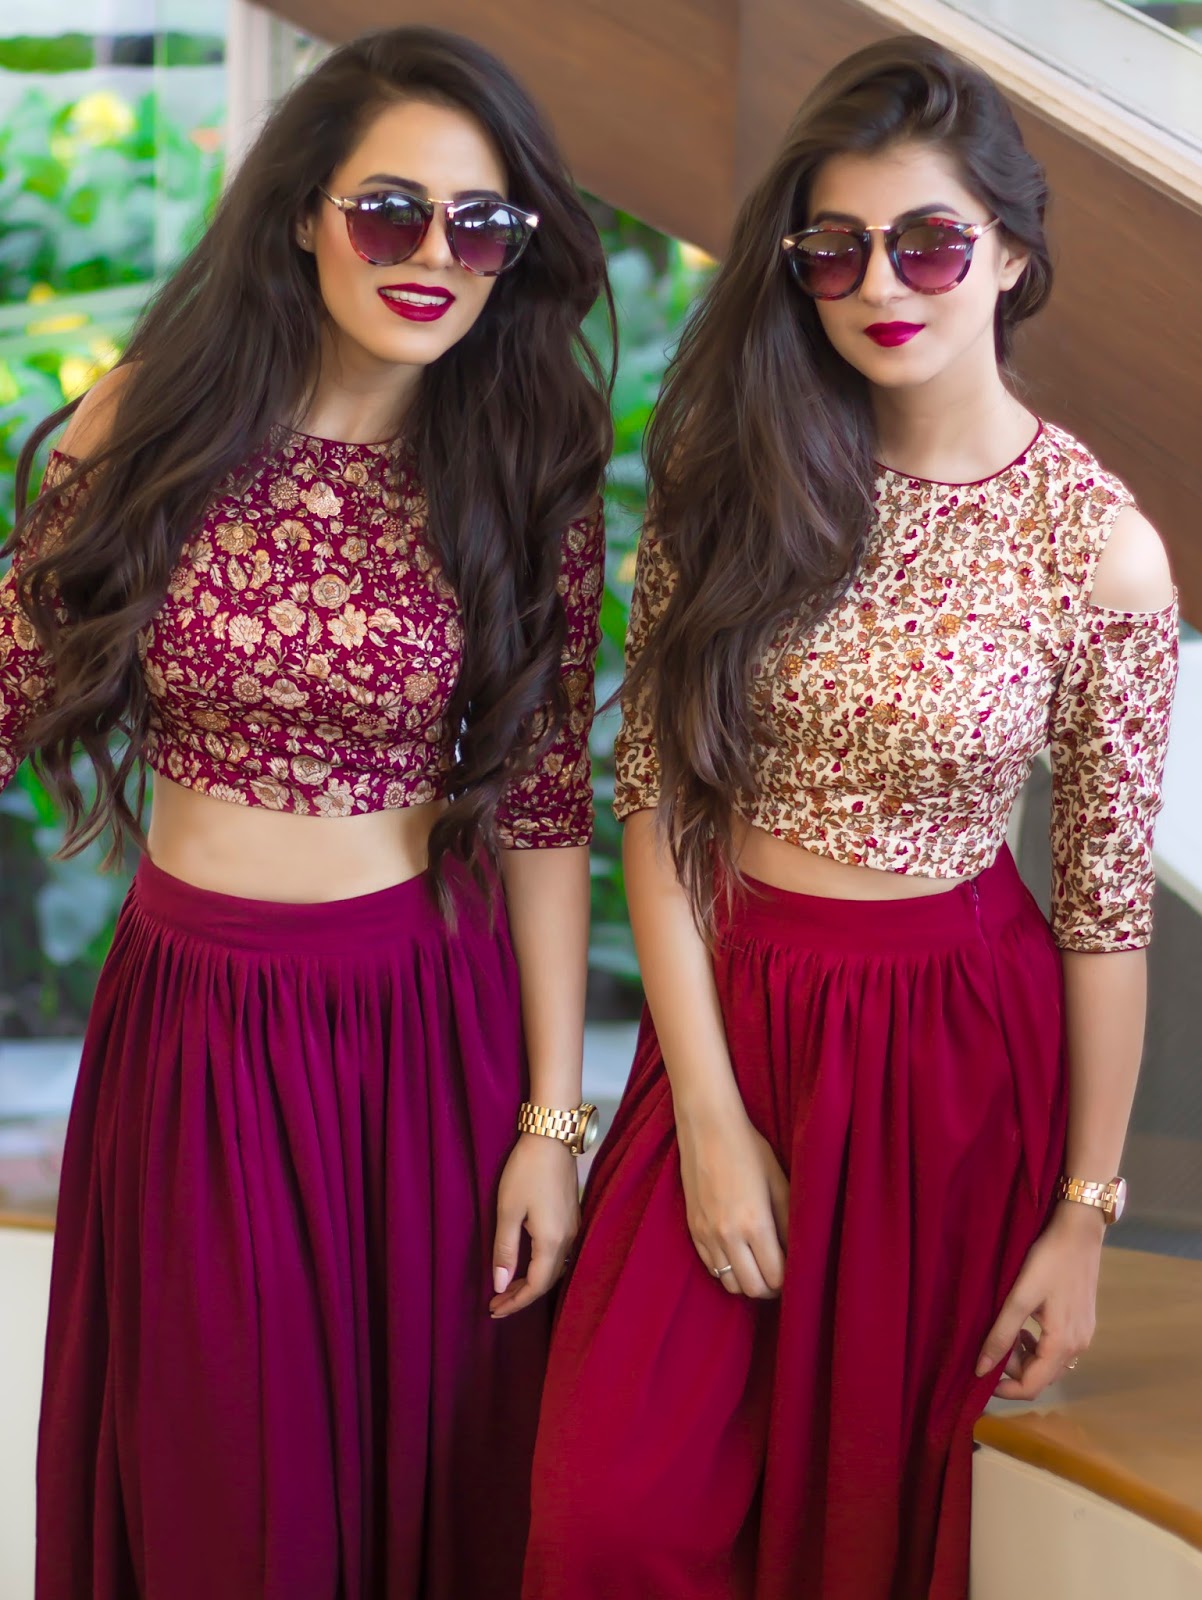 crop top for traditional skirt